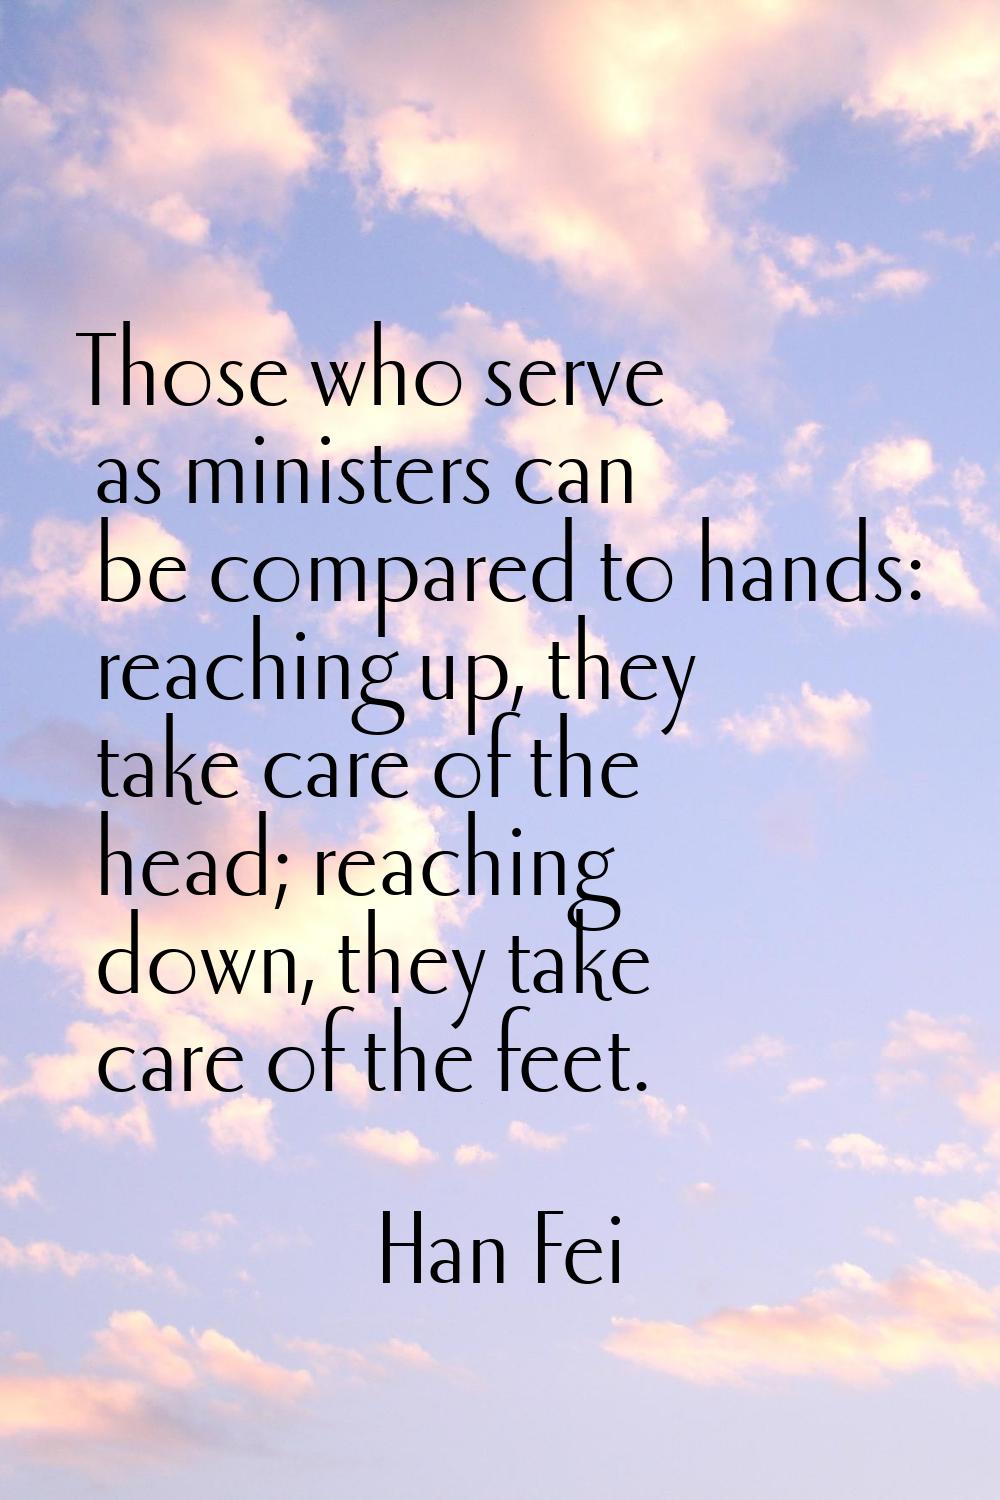 Those who serve as ministers can be compared to hands: reaching up, they take care of the head; rea